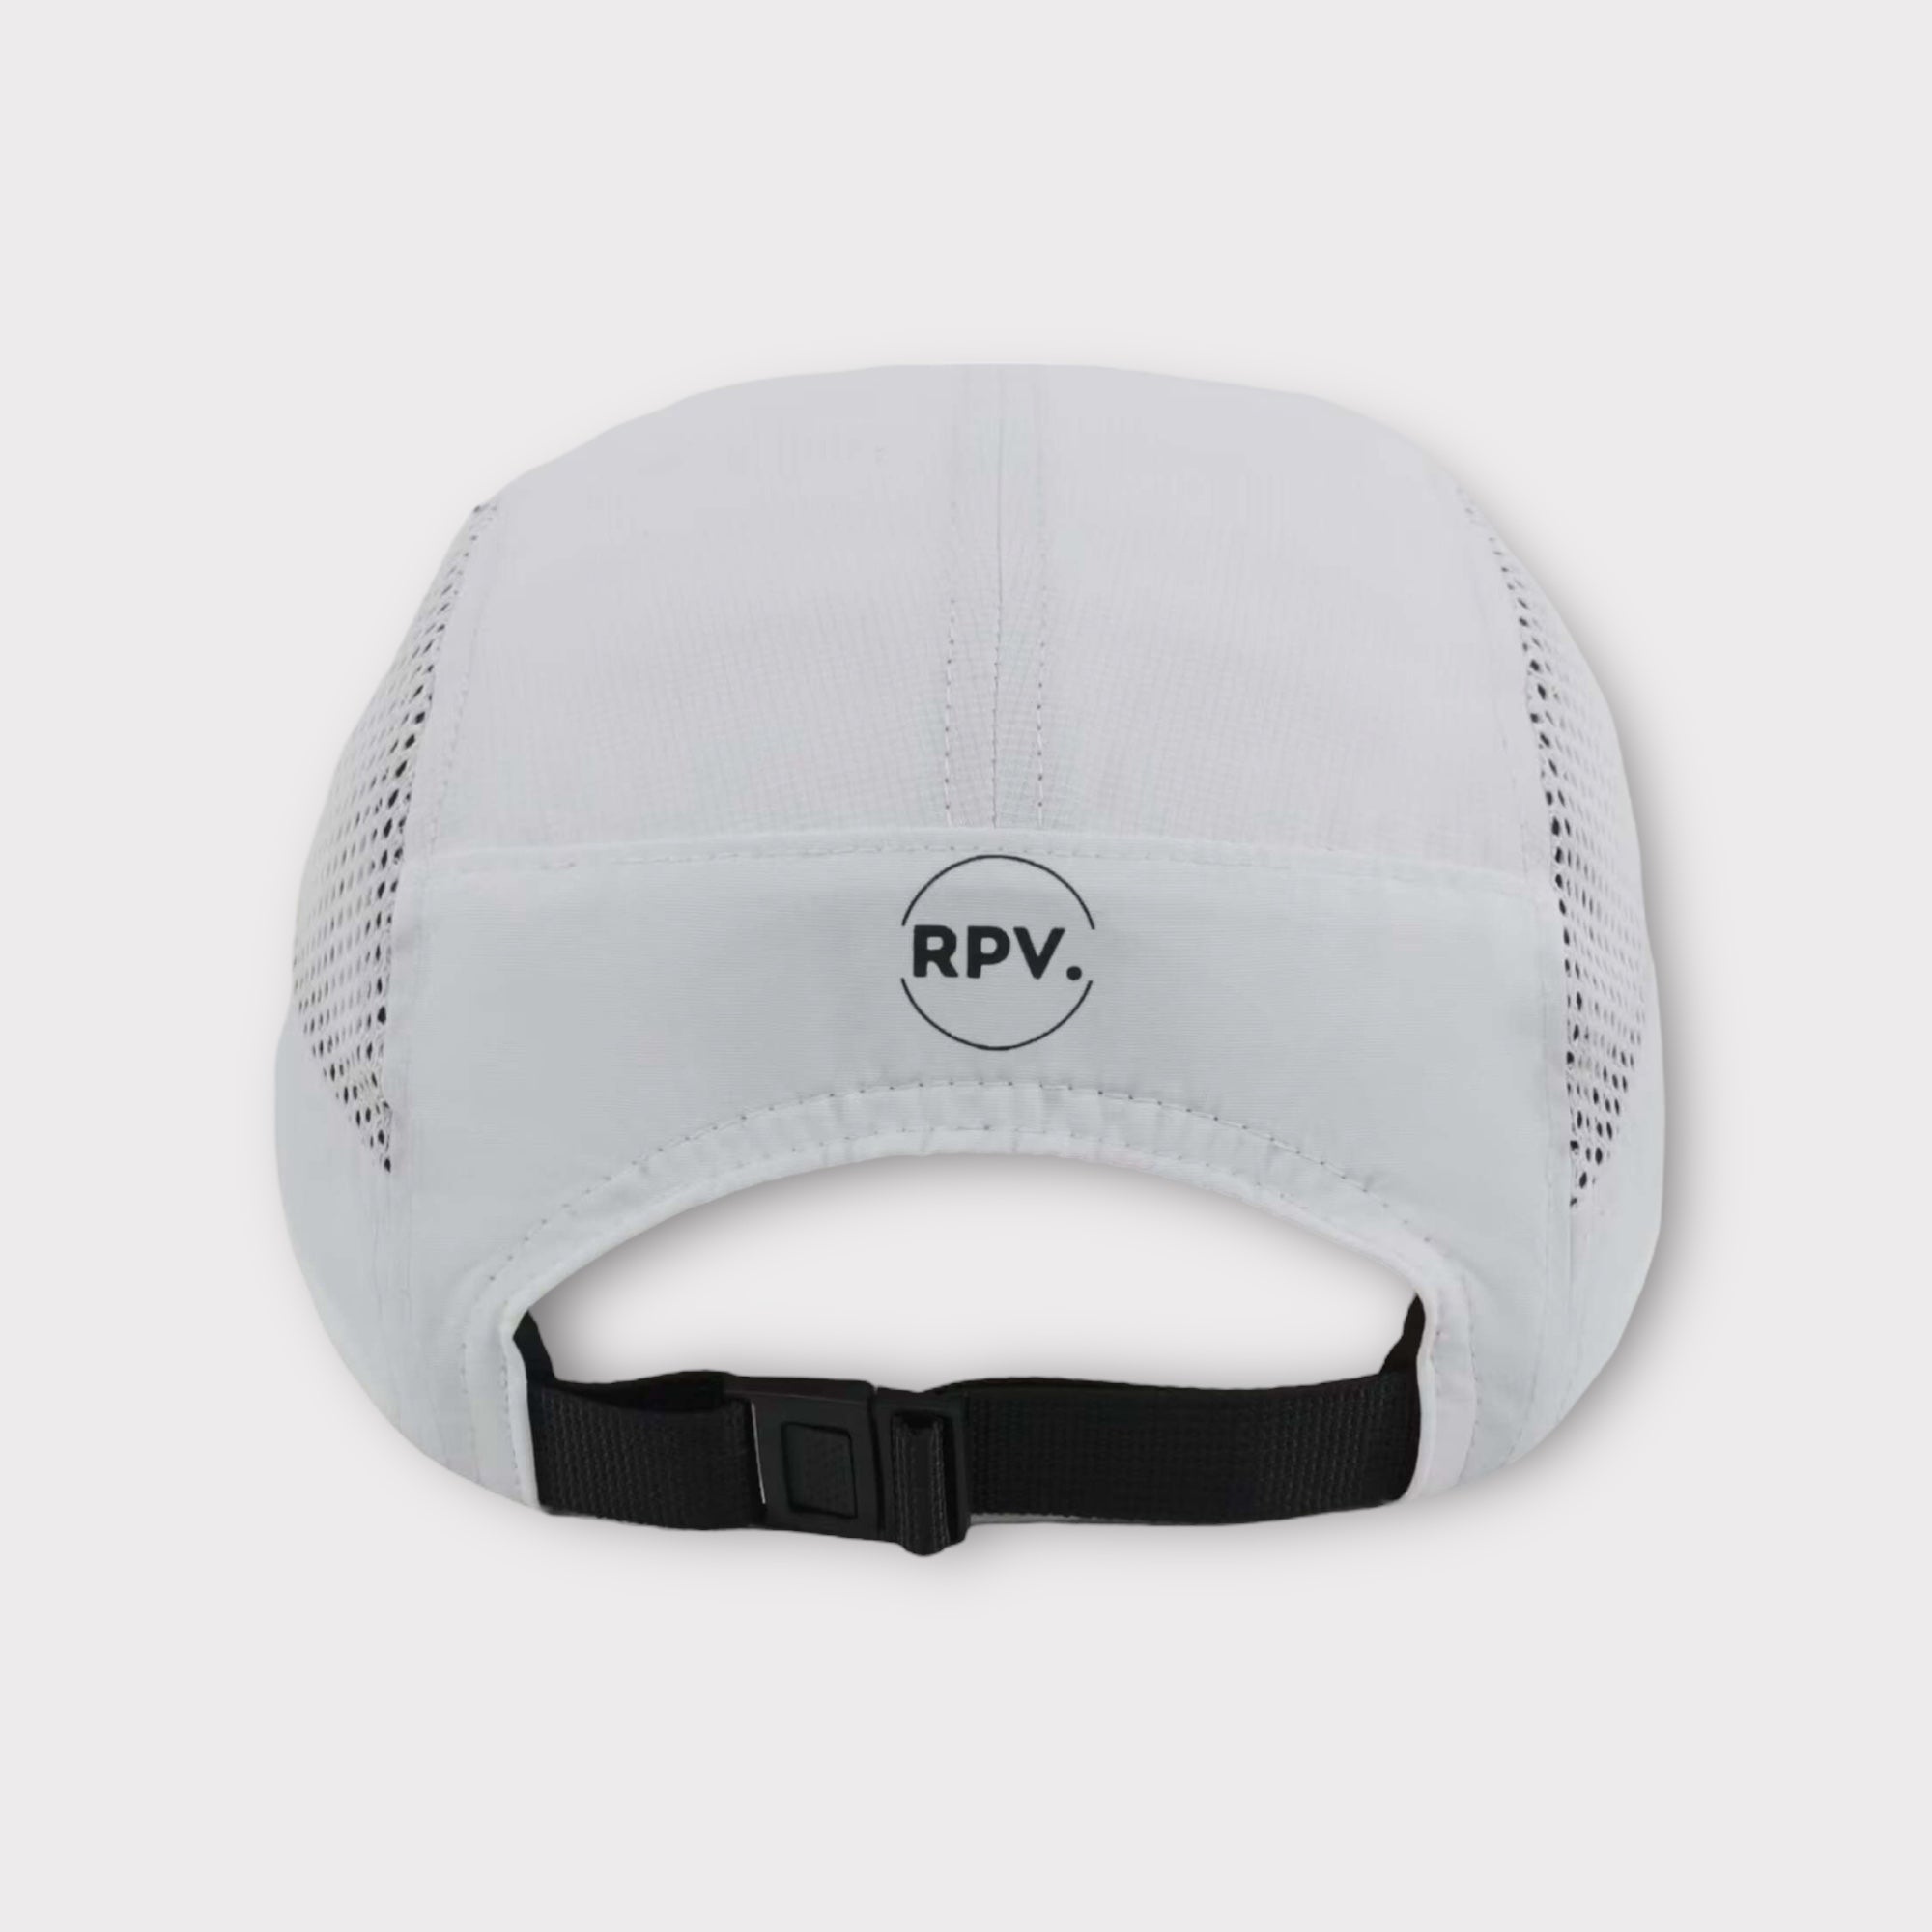 Introducing Running Caps by RPV. Vers 2 (White) – a perfect fusion of style and functionality. Inspired by the tranquil shades of nature, this cap features a captivating earthy green hue that effortlessly blends with outdoor surroundings.